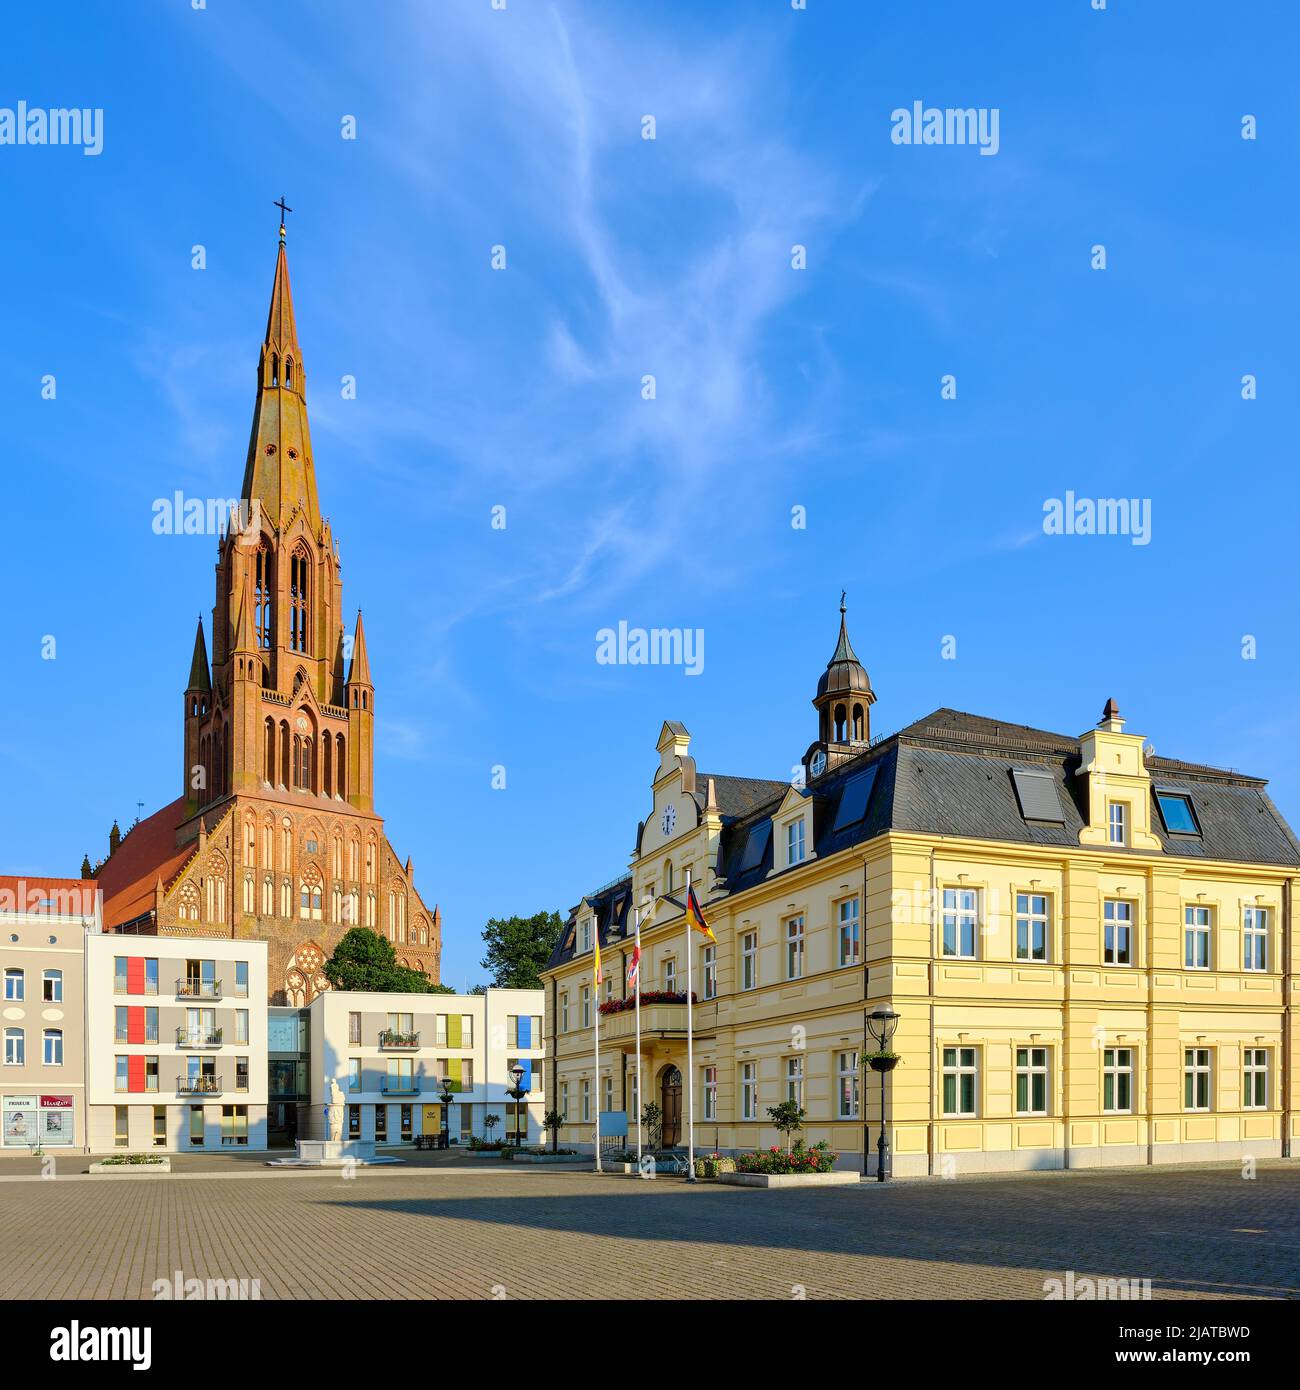 Hanseatic Town of Demmin, Mecklenburg-Western Pomerania, Germany, August 7, 2020: Town hall and Bartholomew's Church. Stock Photo